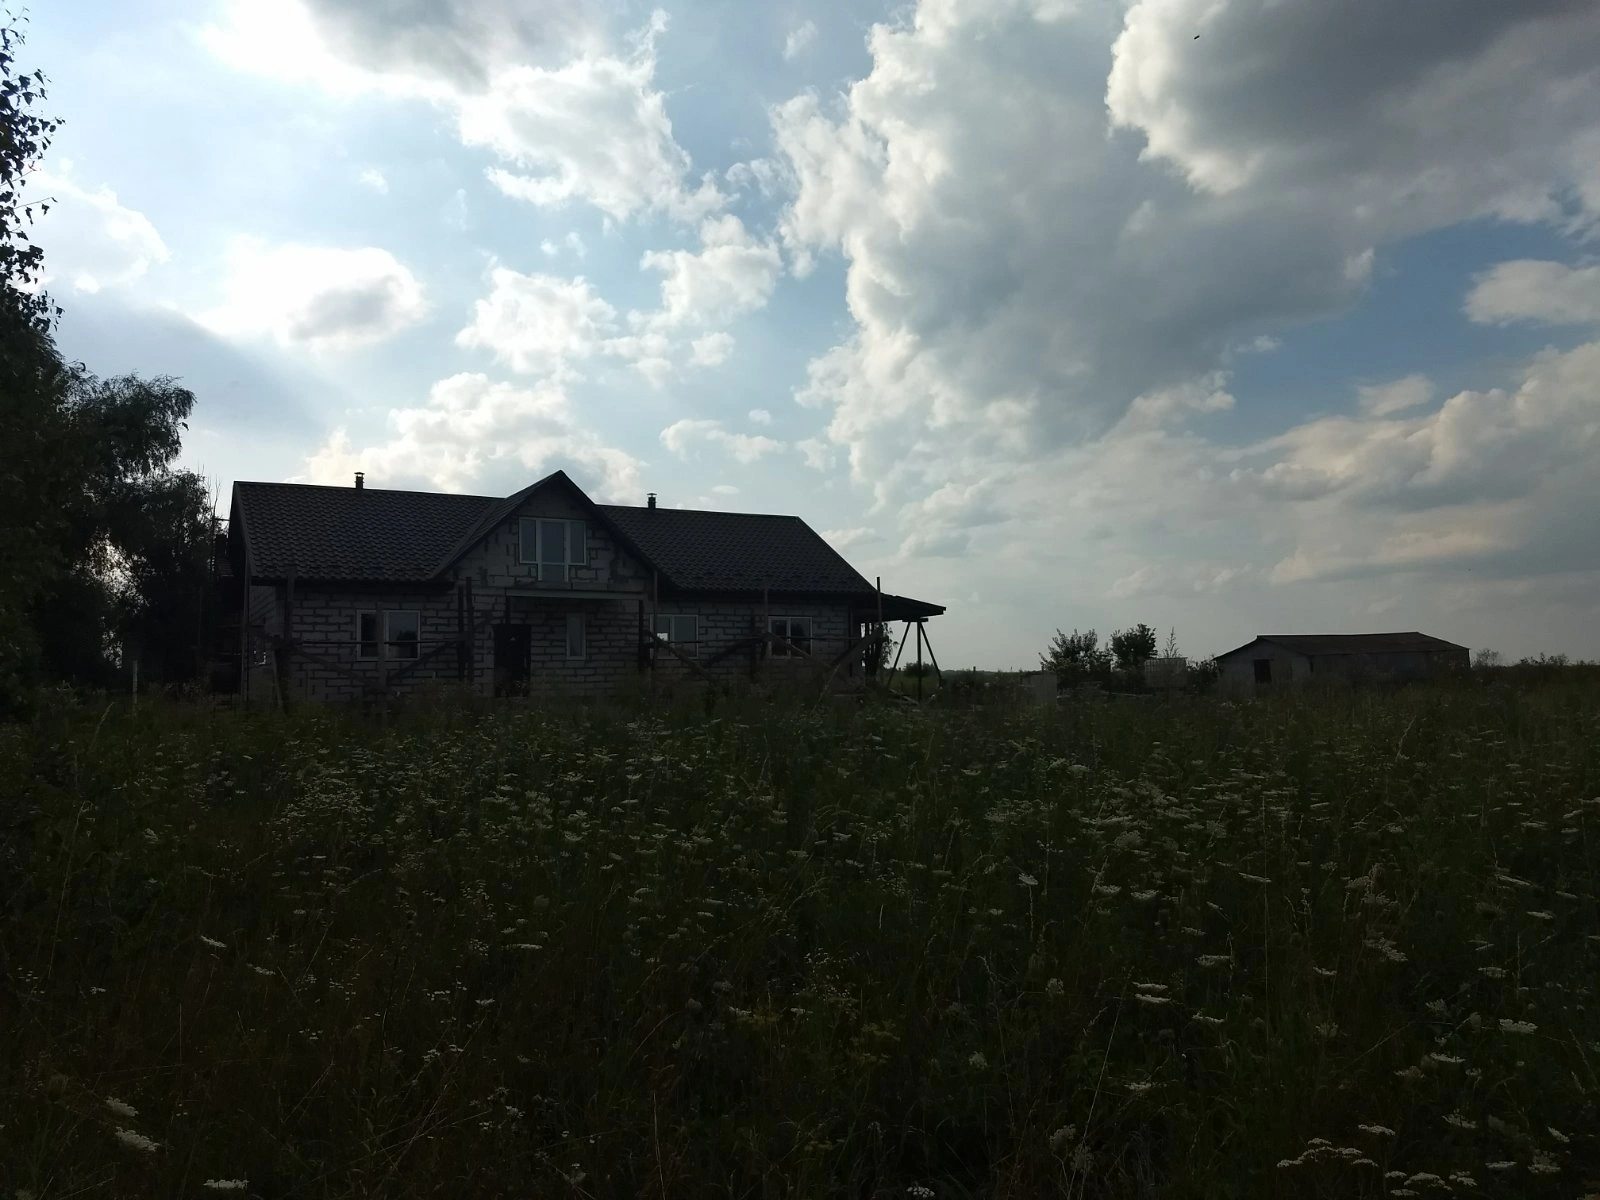 Land for sale for residential construction. Semypolky, Brovary. 